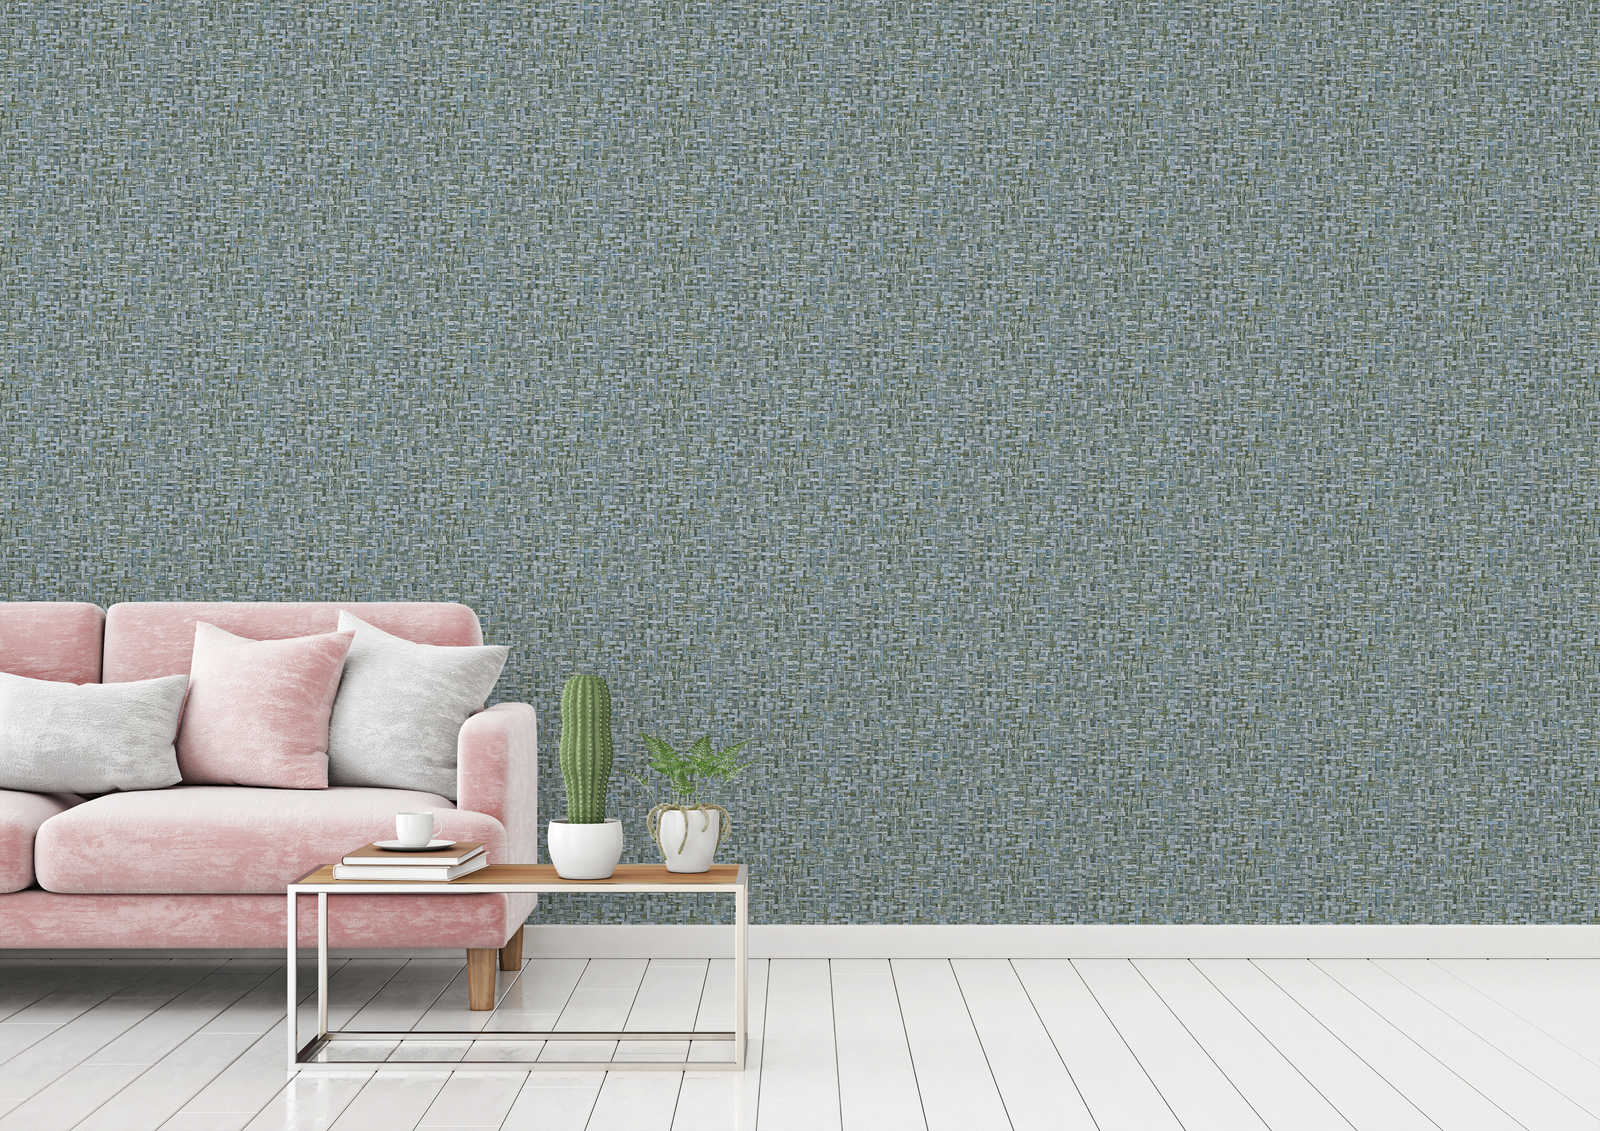             Non-woven wallpaper blue green with braided pattern in nature style - blue
        